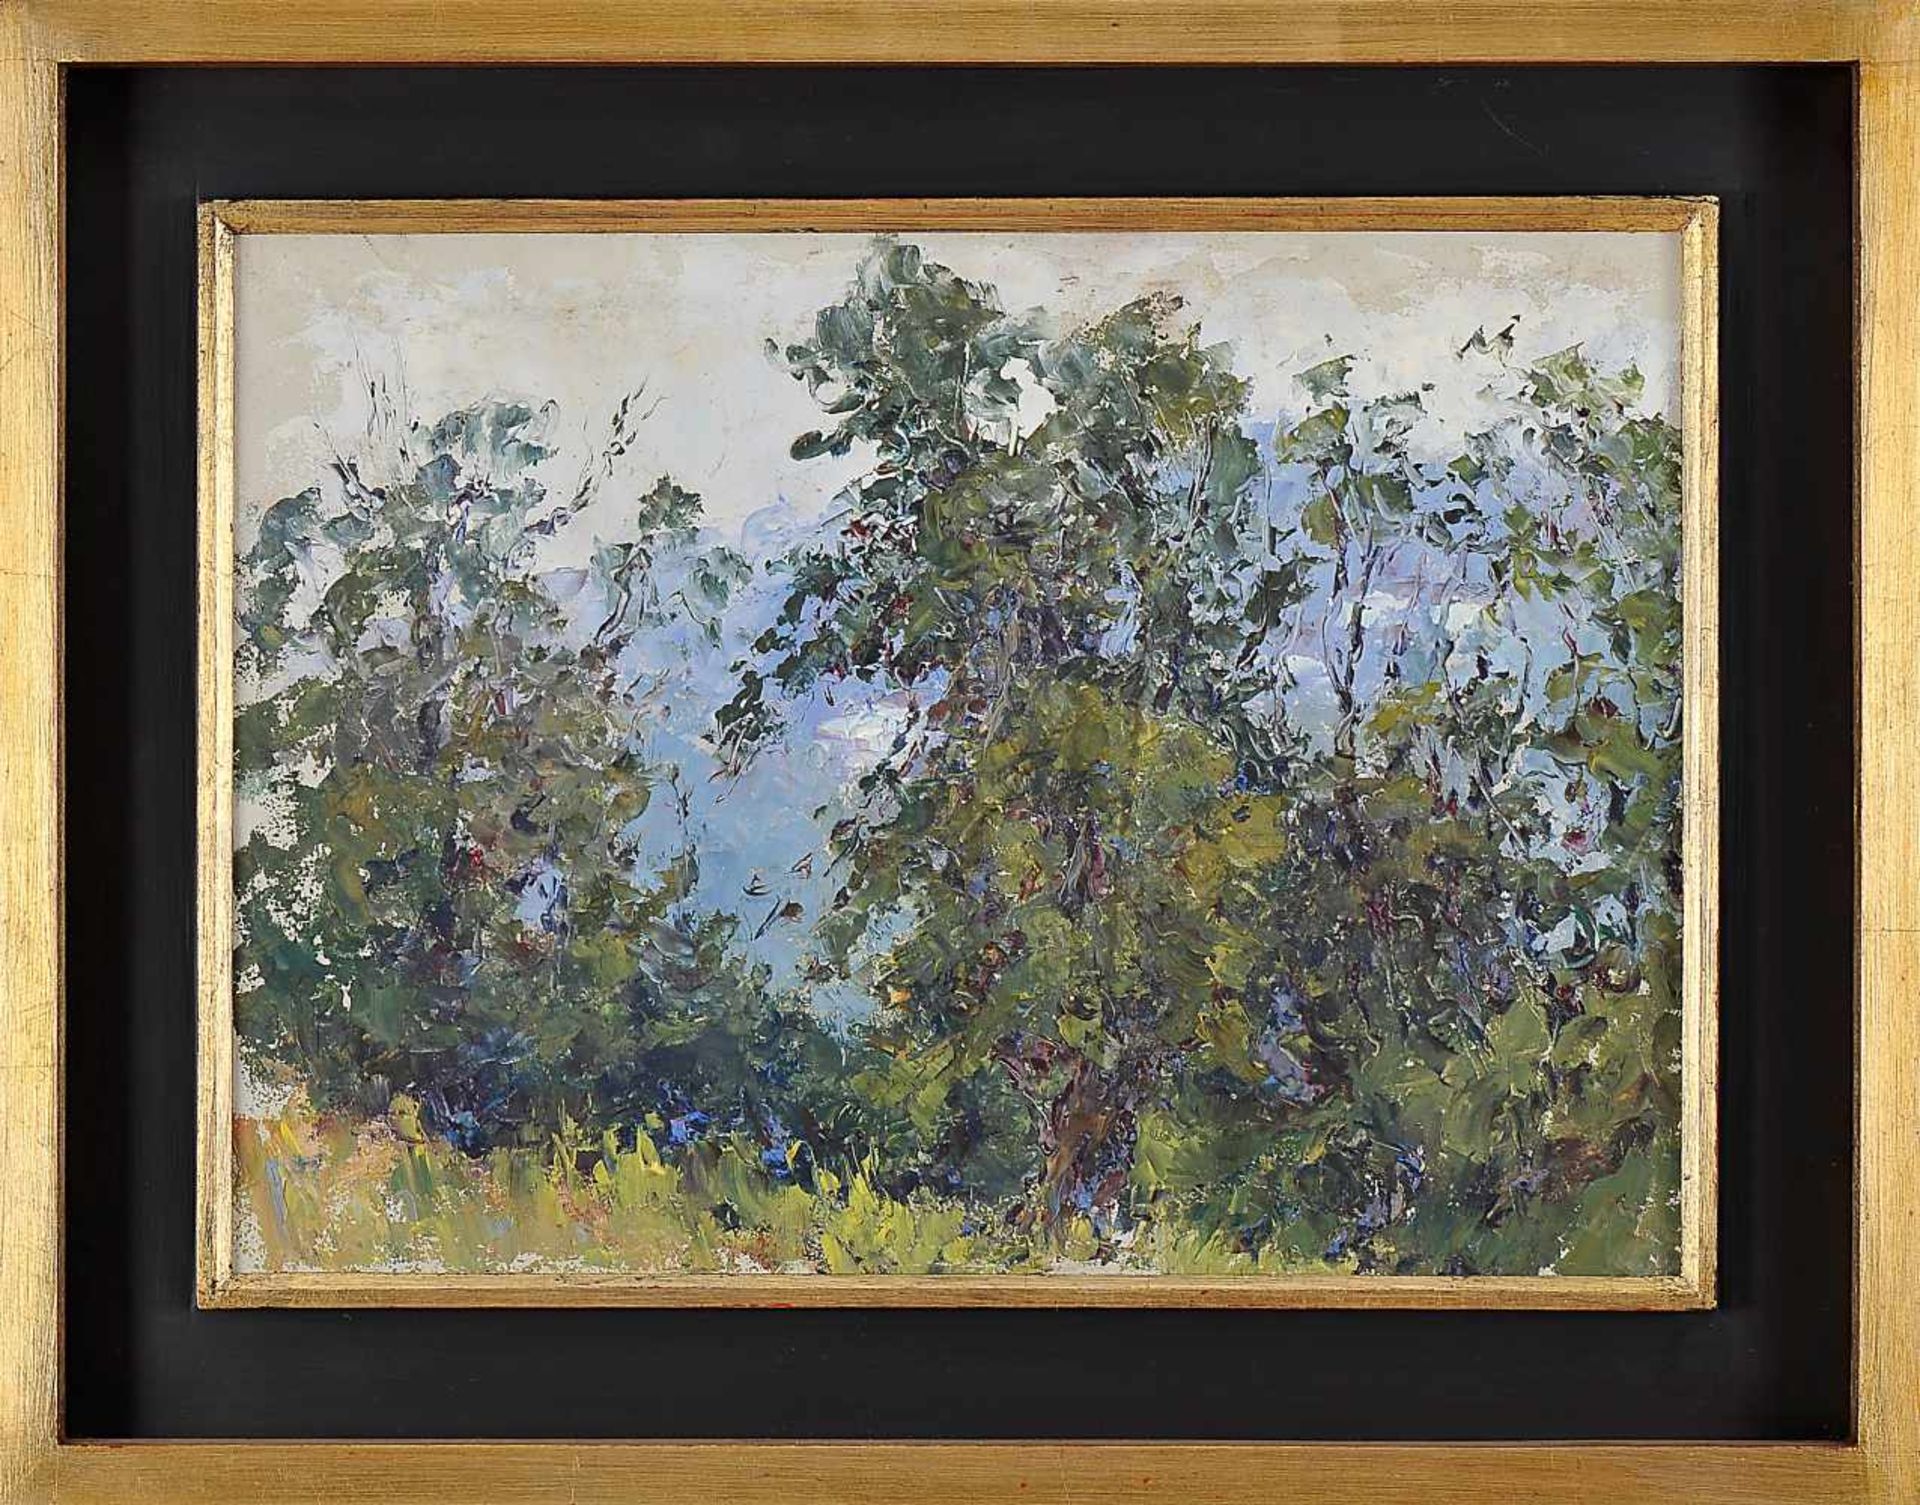 JAIME MURTEIRA - 1910-1986, Landscape, oil on chipboard, unsigned. Notes: accompanied by certificate